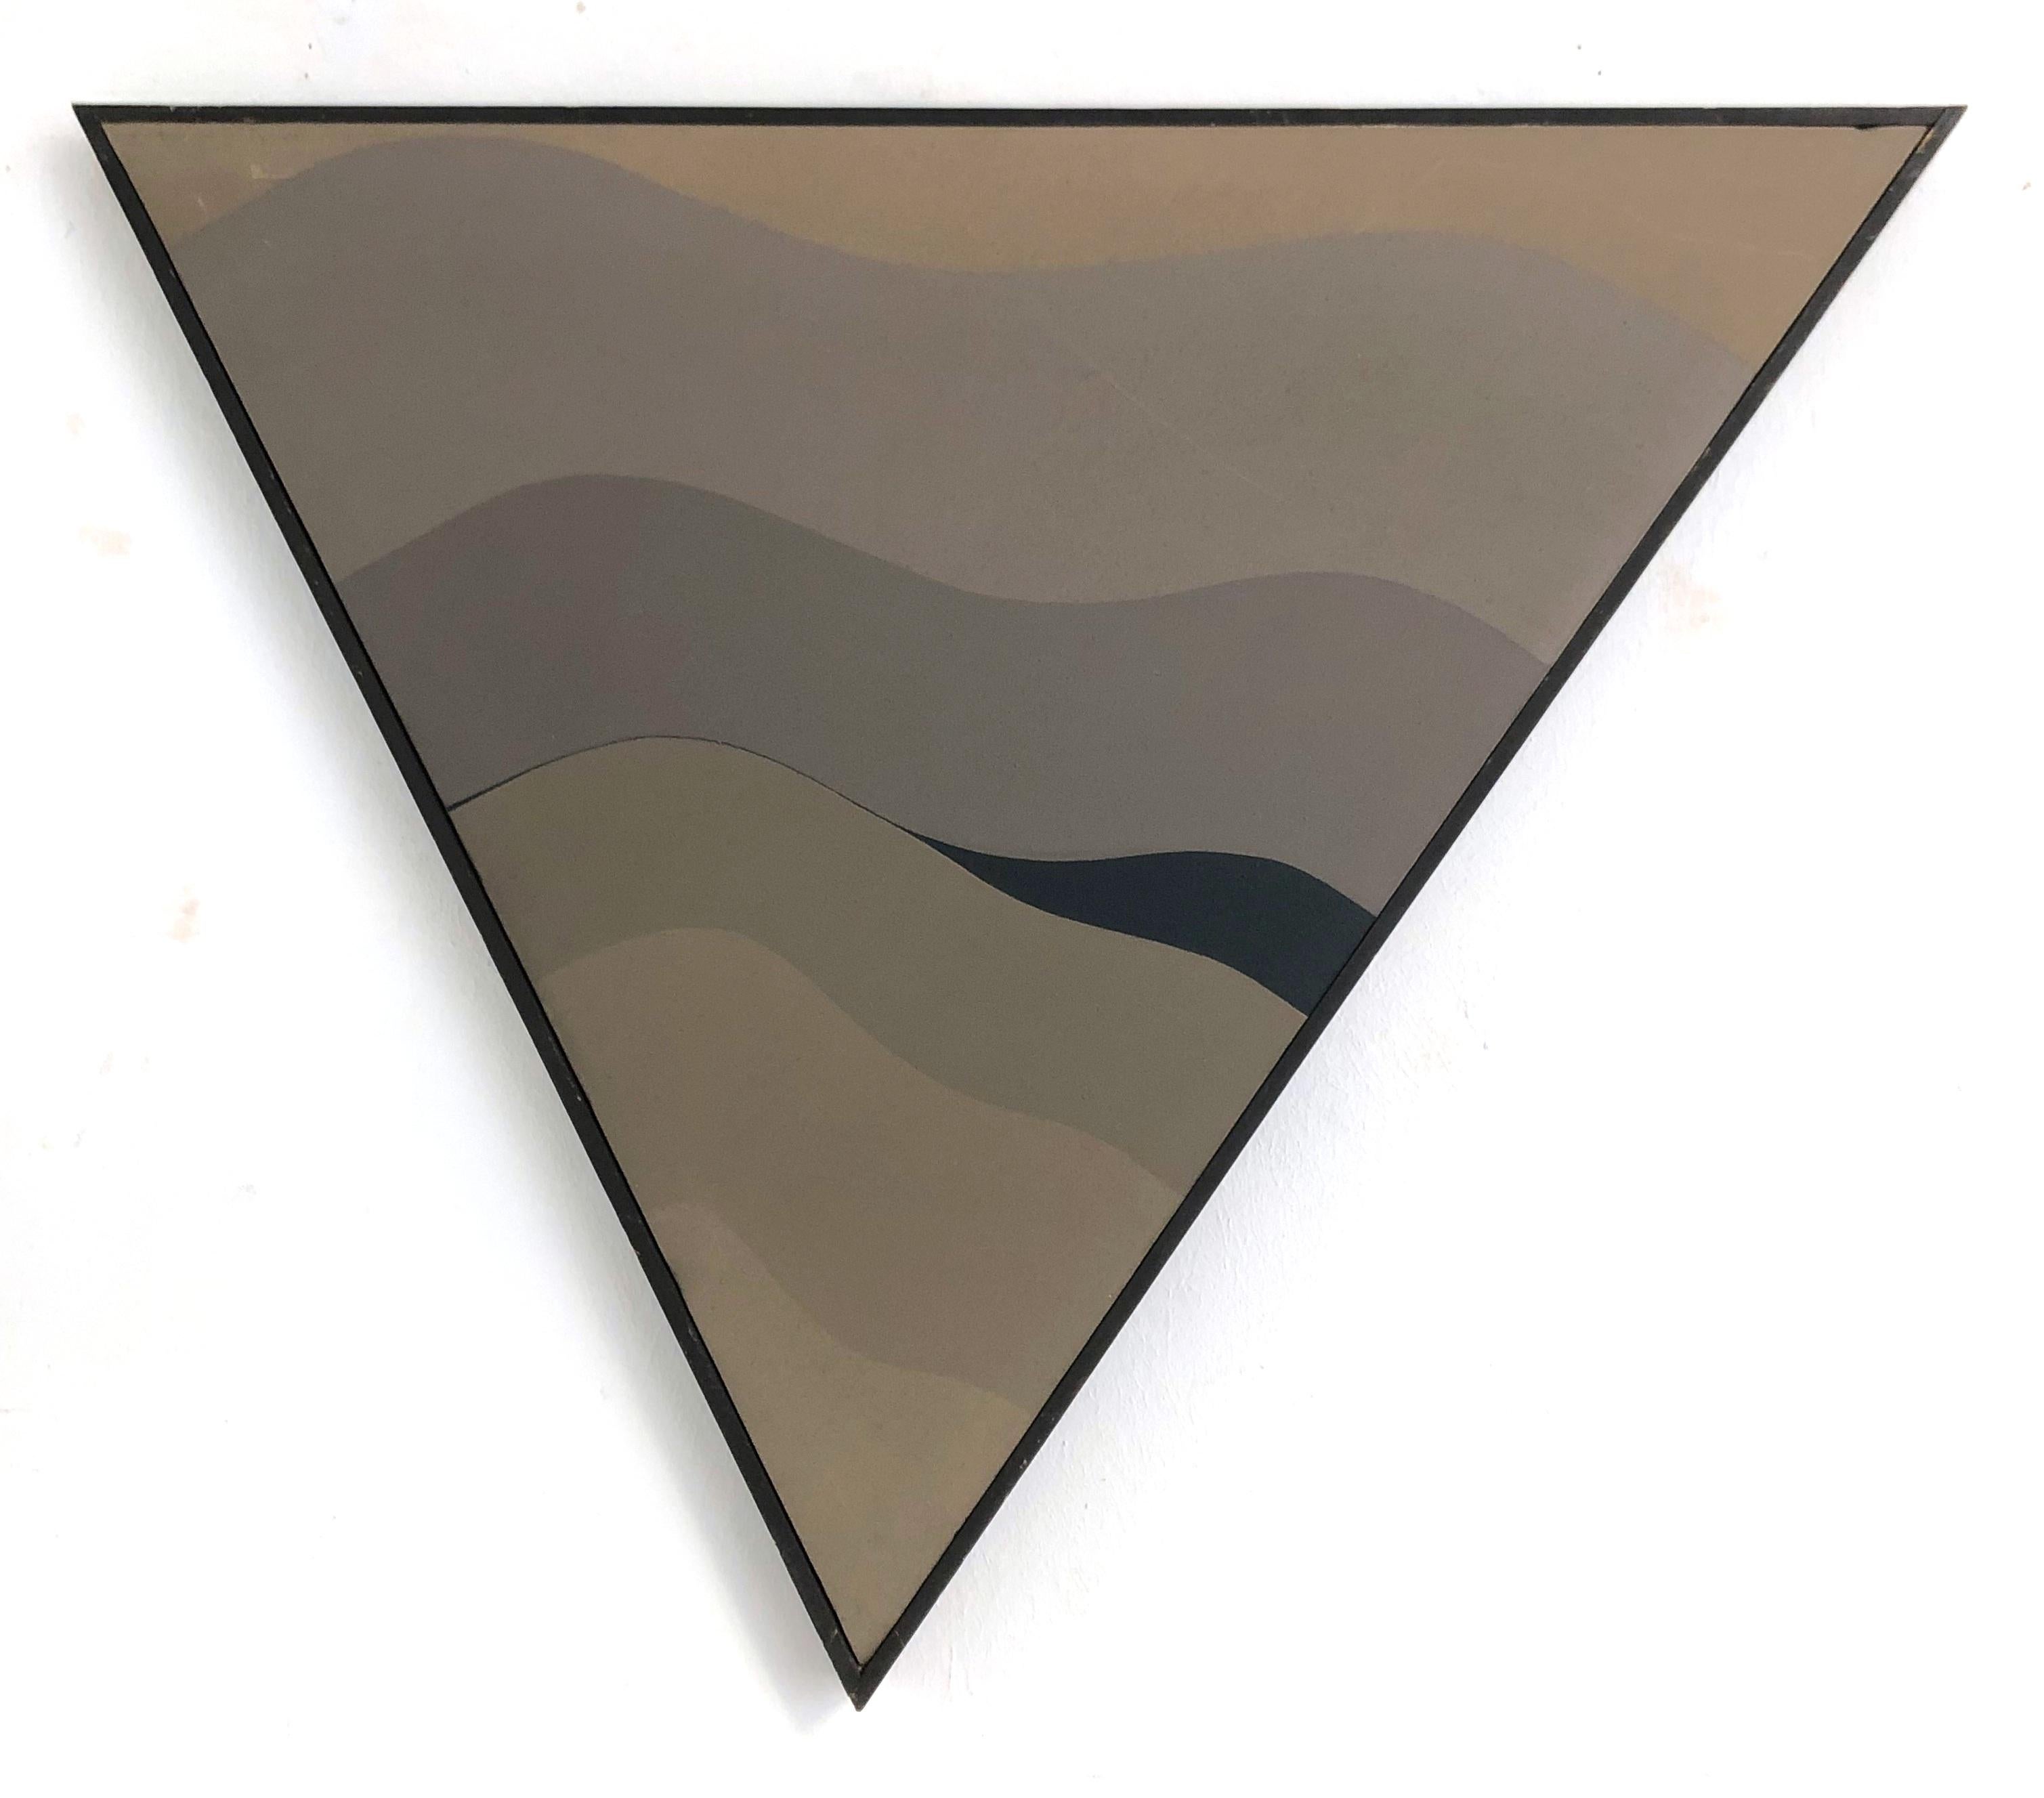 Hannes Grosse Abstract Painting - Wave Form II (Wellenform) (Triangle, Wavy, Modern, Mid-Century) (~50% OFF)